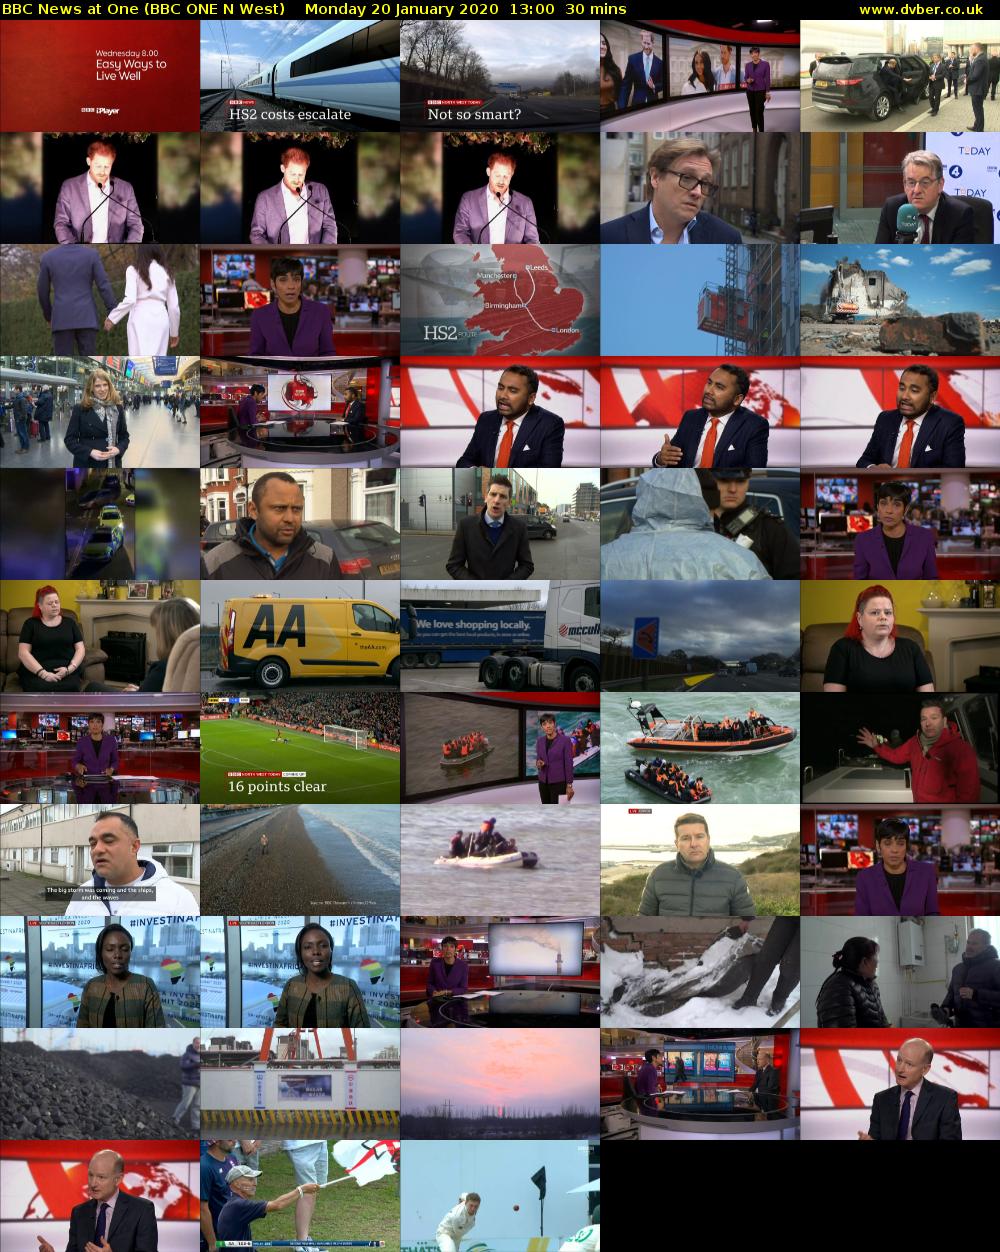 BBC News at One (BBC ONE N West) Monday 20 January 2020 13:00 - 13:30